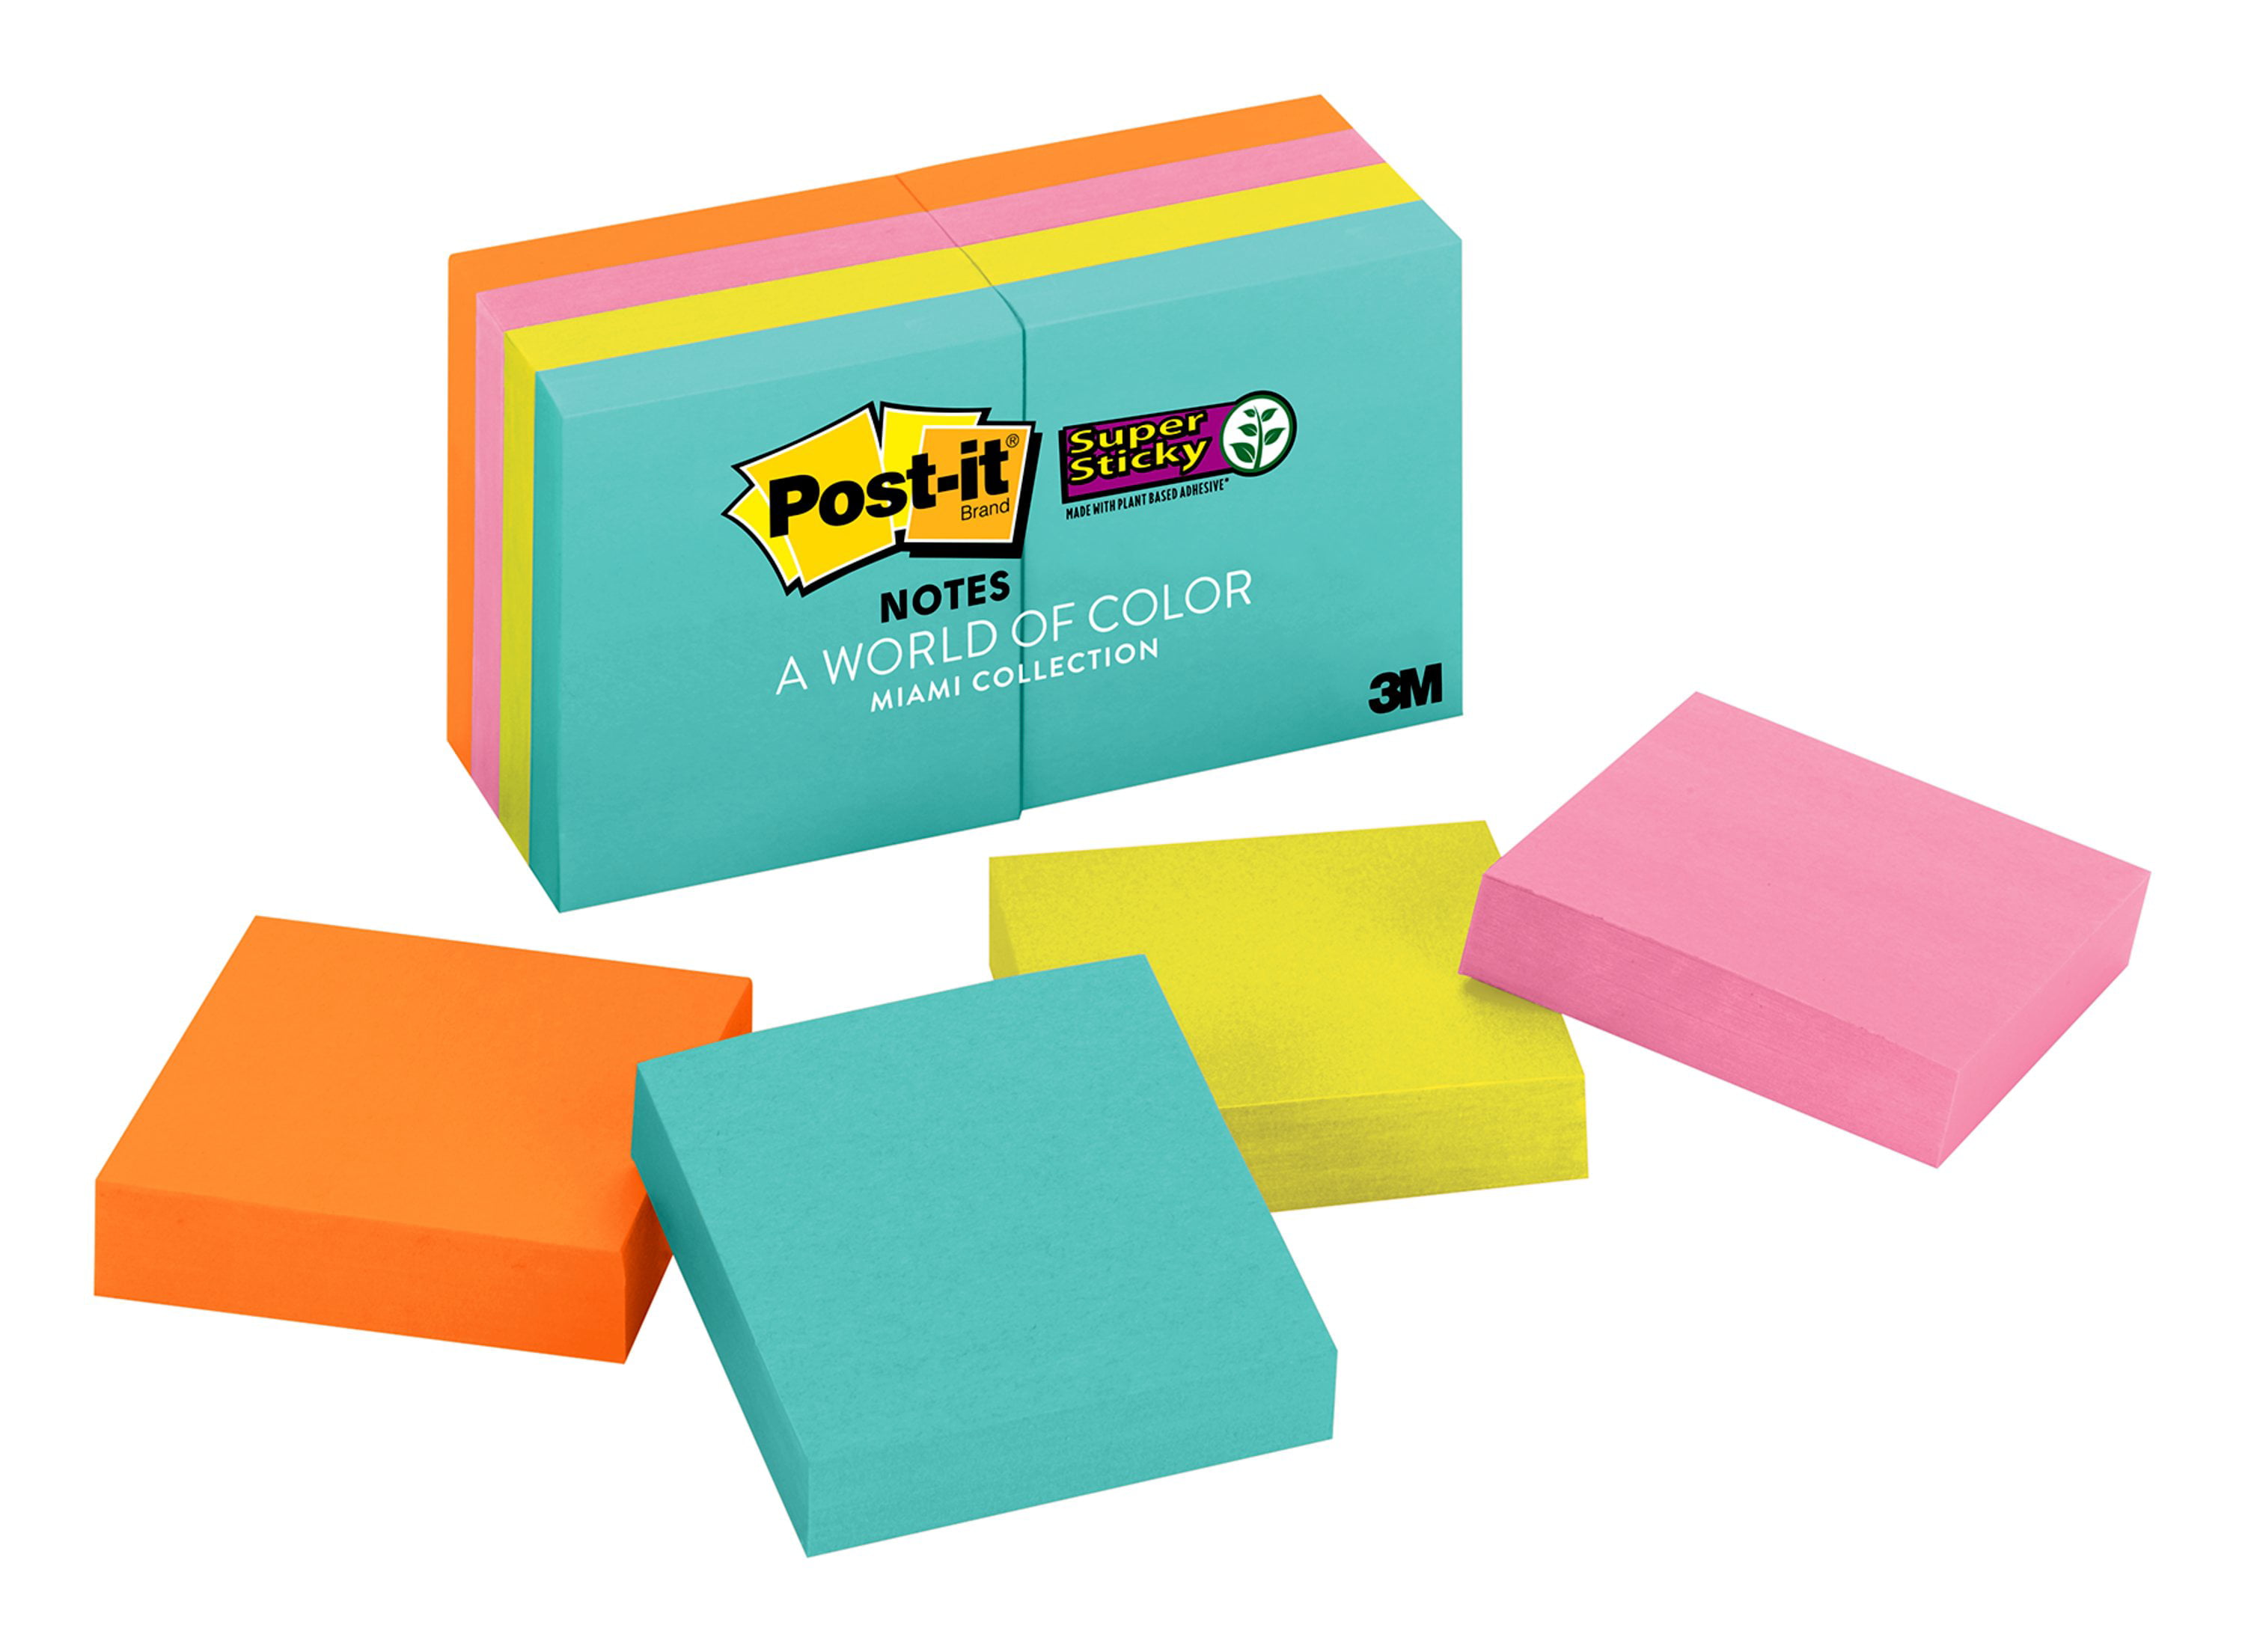 post-it-super-sticky-notes-2-x-2-miami-collection-8-pads-walmart